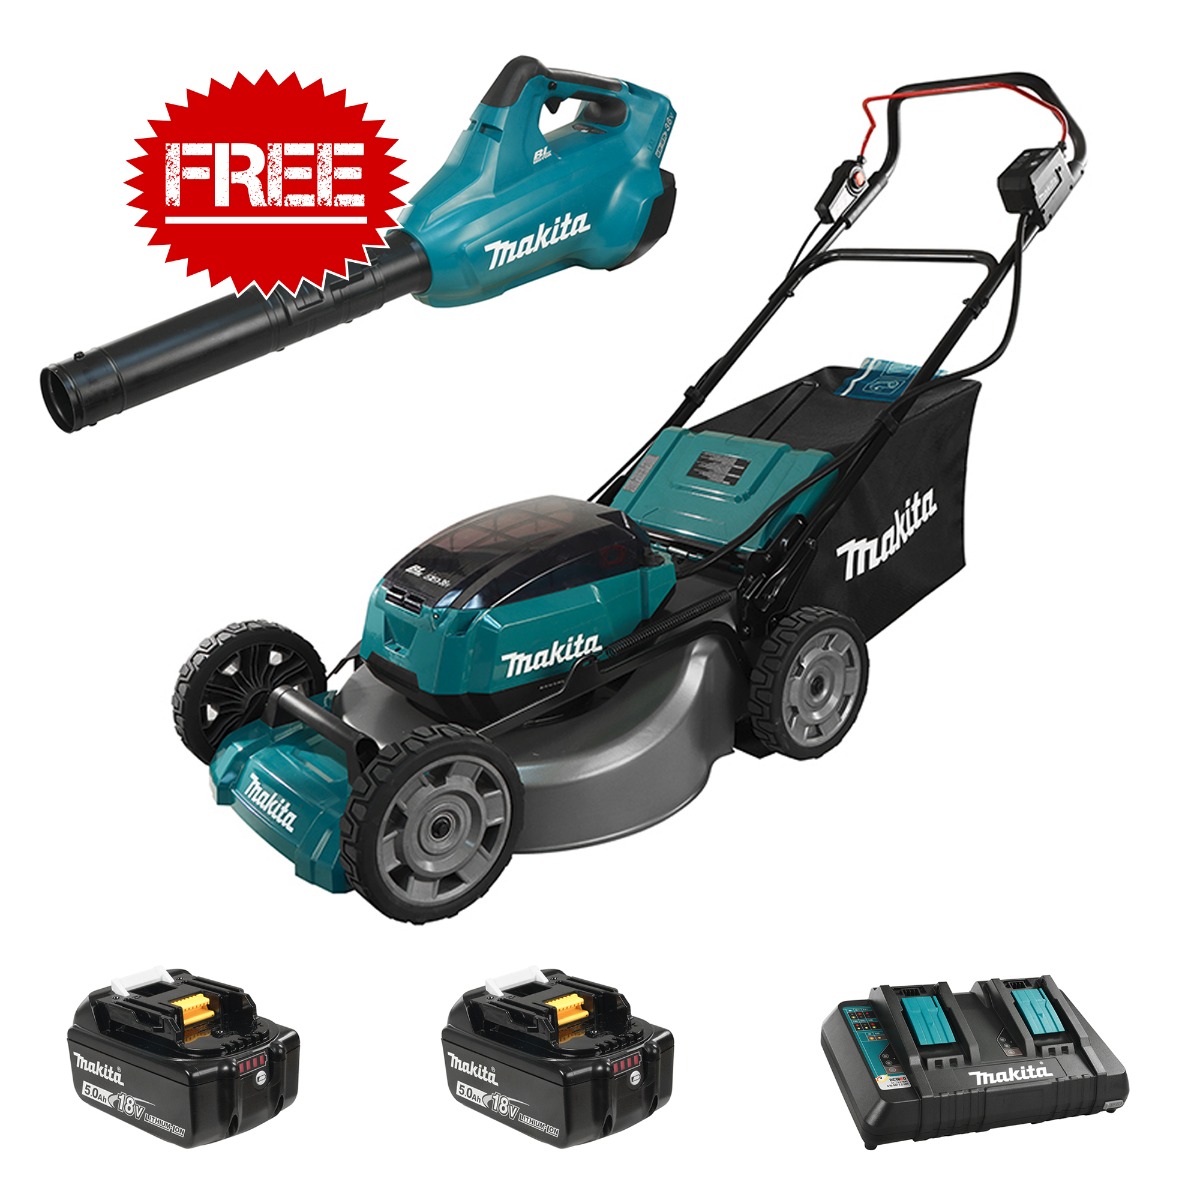 Makita 18Vx2 21" Cordless Lawn Mower with FREE Blower